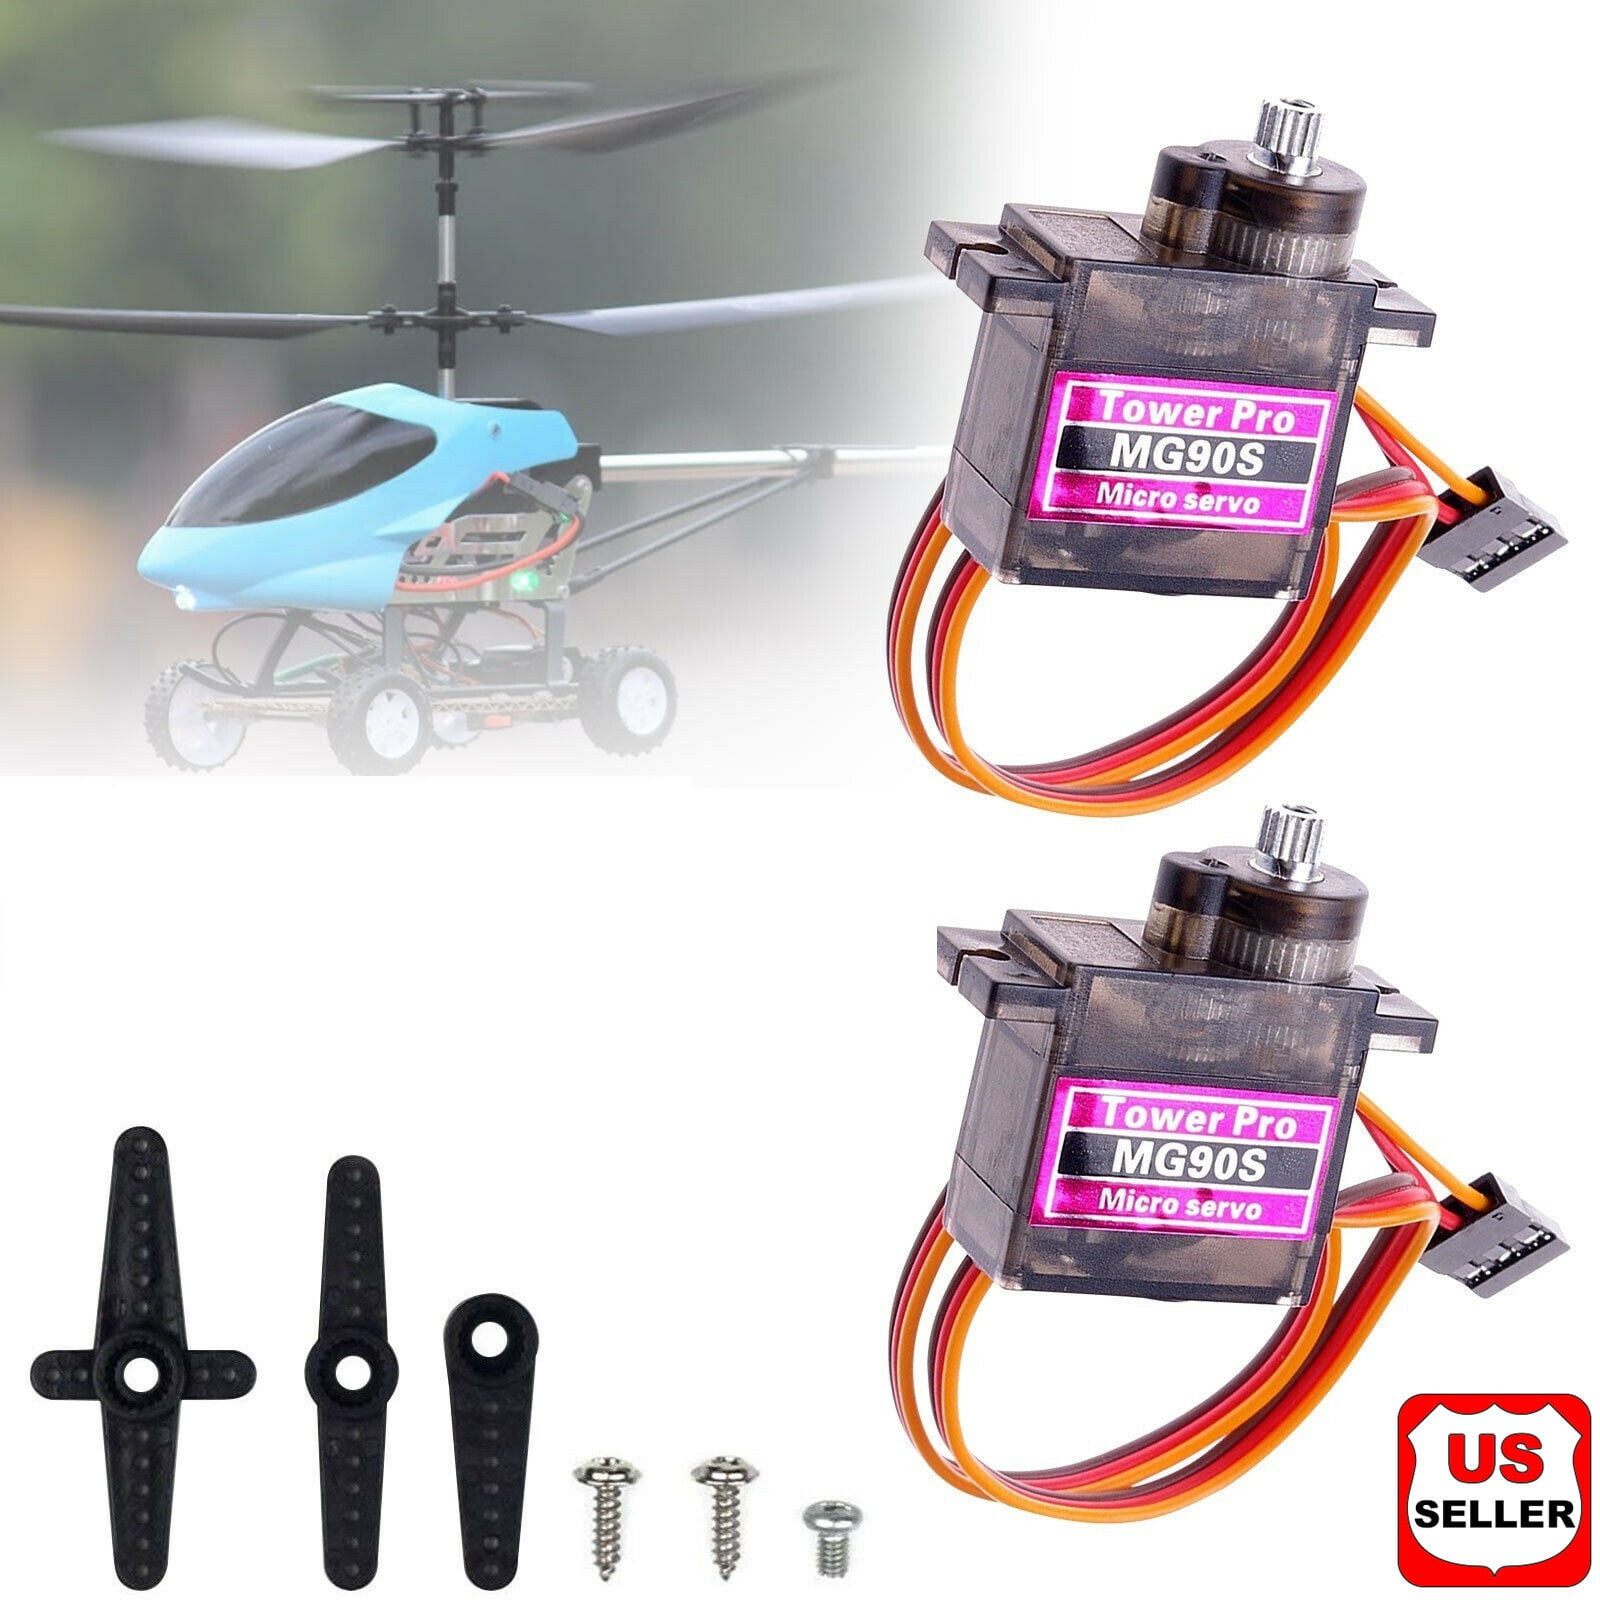 180° ZHITING 3pcs MG90S Metal Geared Micro 9G Servo Motor for RC Robot Car Helicopter Airplane